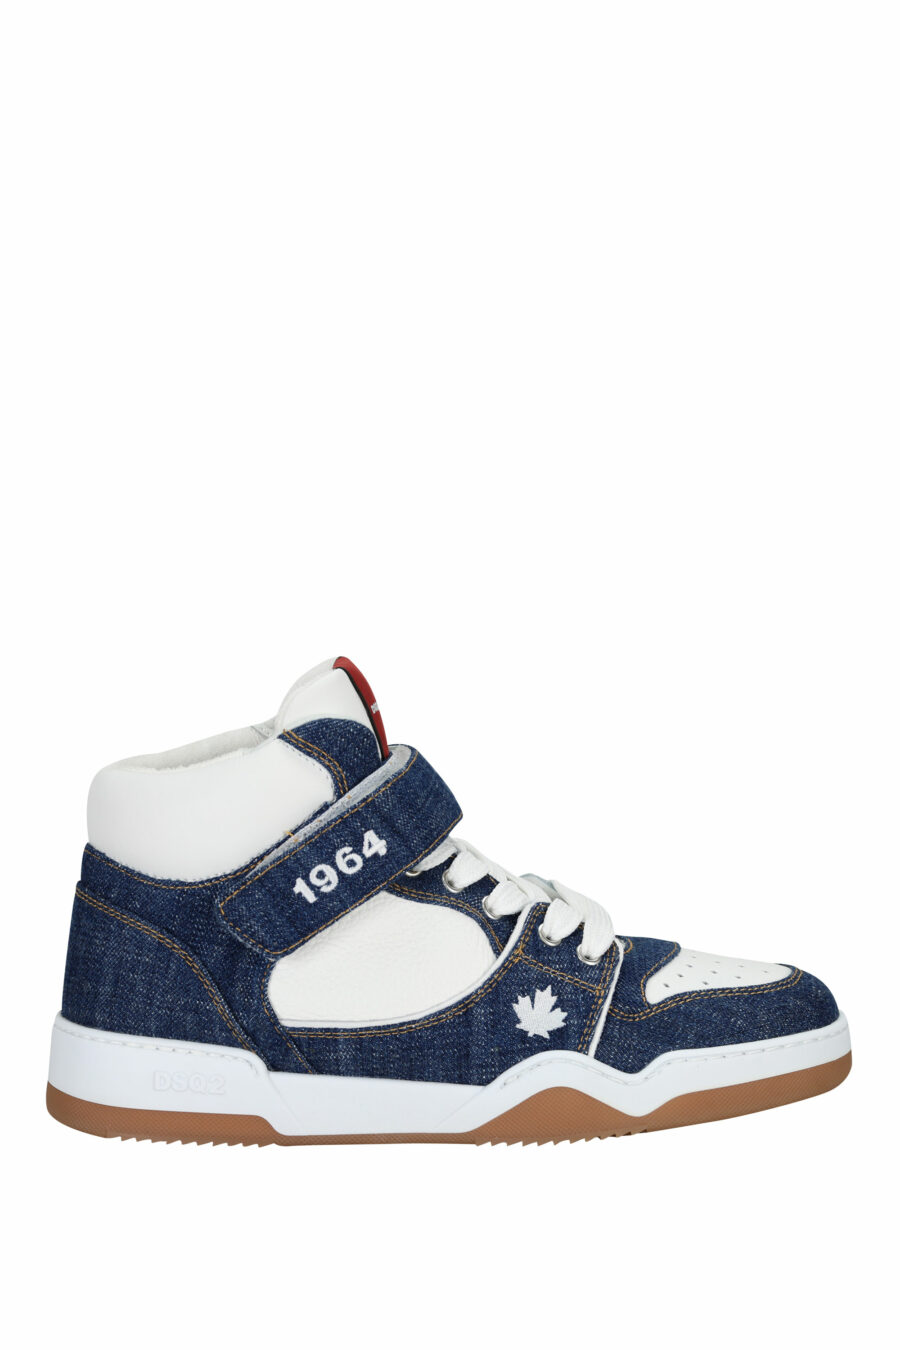 Blue denim "spyker" white high top trainers with logo - 8055777306079